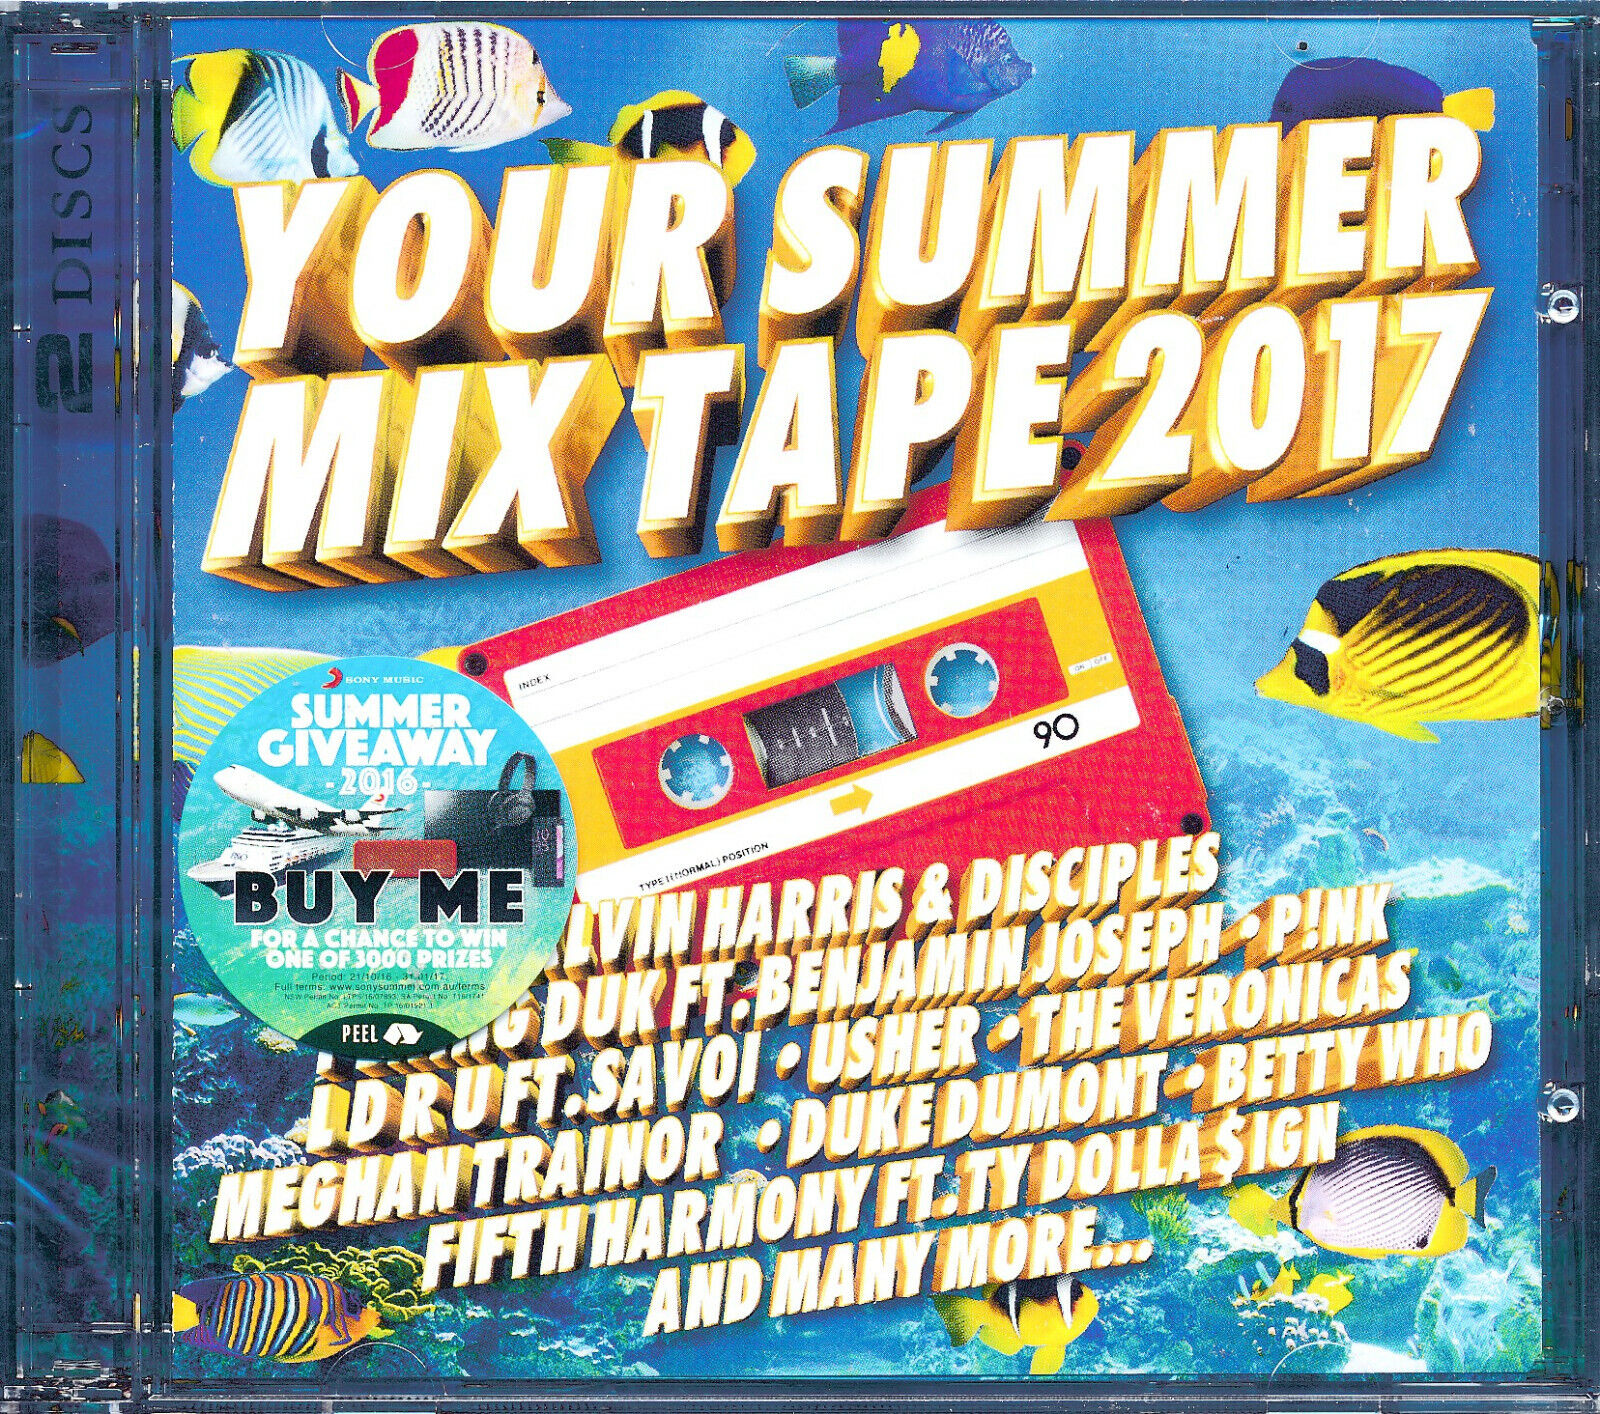 Your Summer Mix Tape 2017 2-disc CD NEW Usher Vernoicas Meghan Trainor